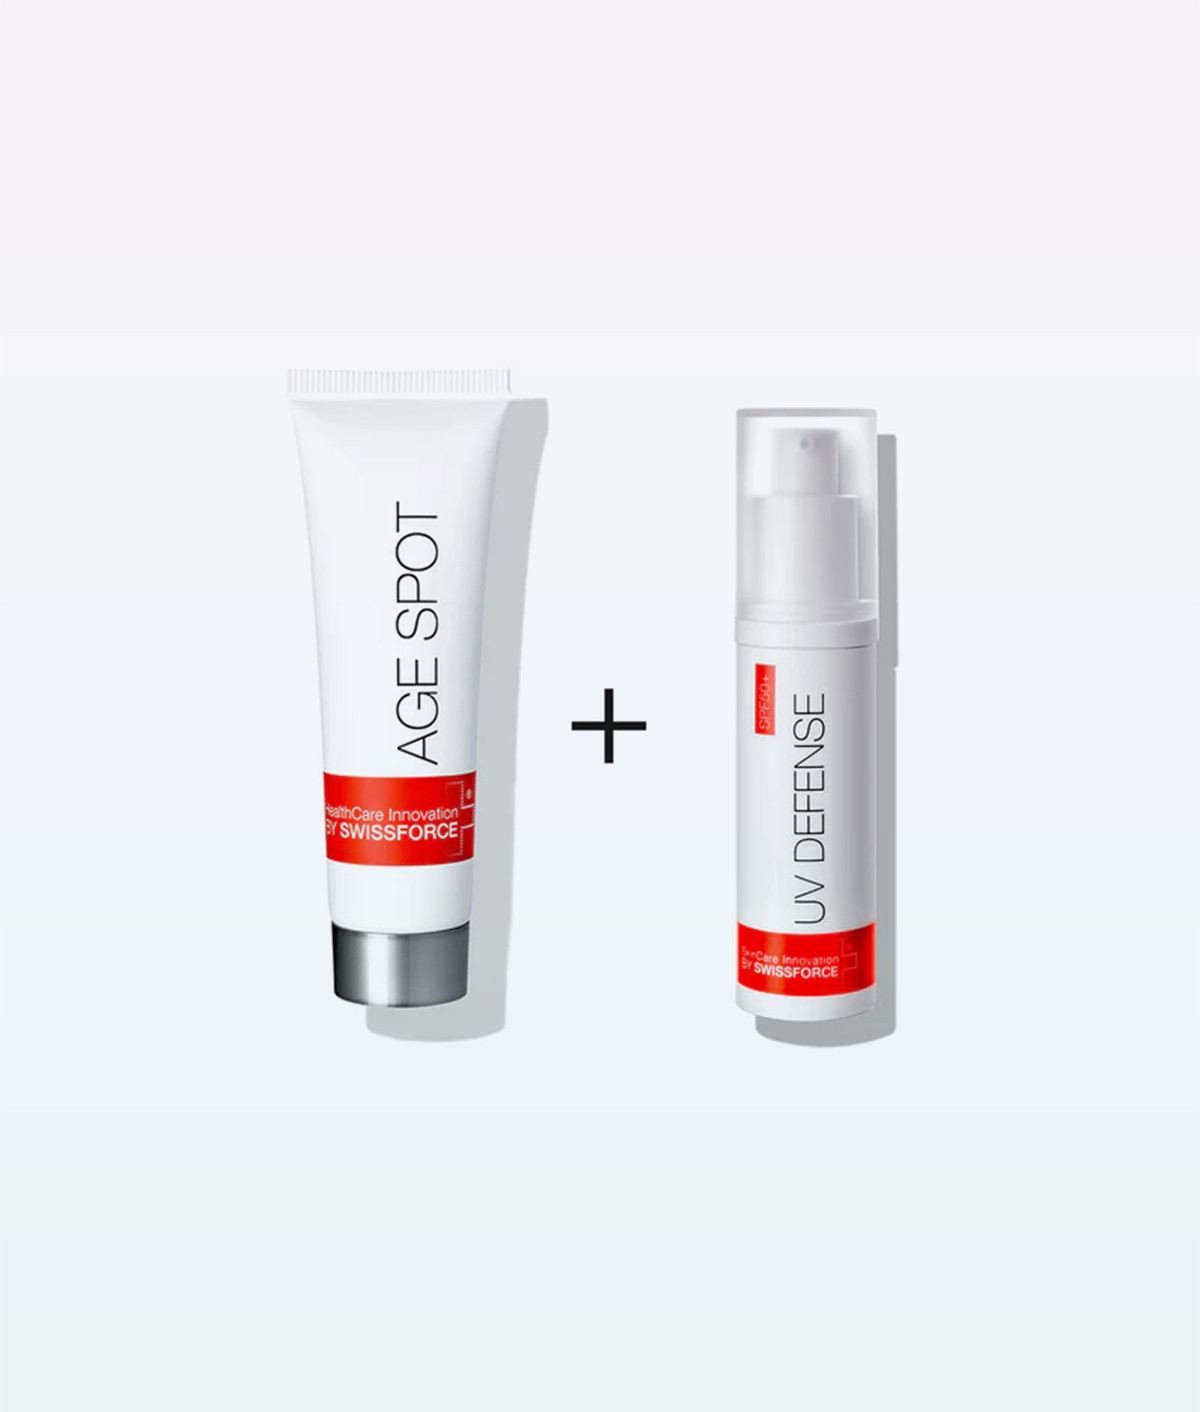 Swissforce Duo Hyperpigmentation Set featuring a tub of face cream and eye cream, displayed on a clean white background.